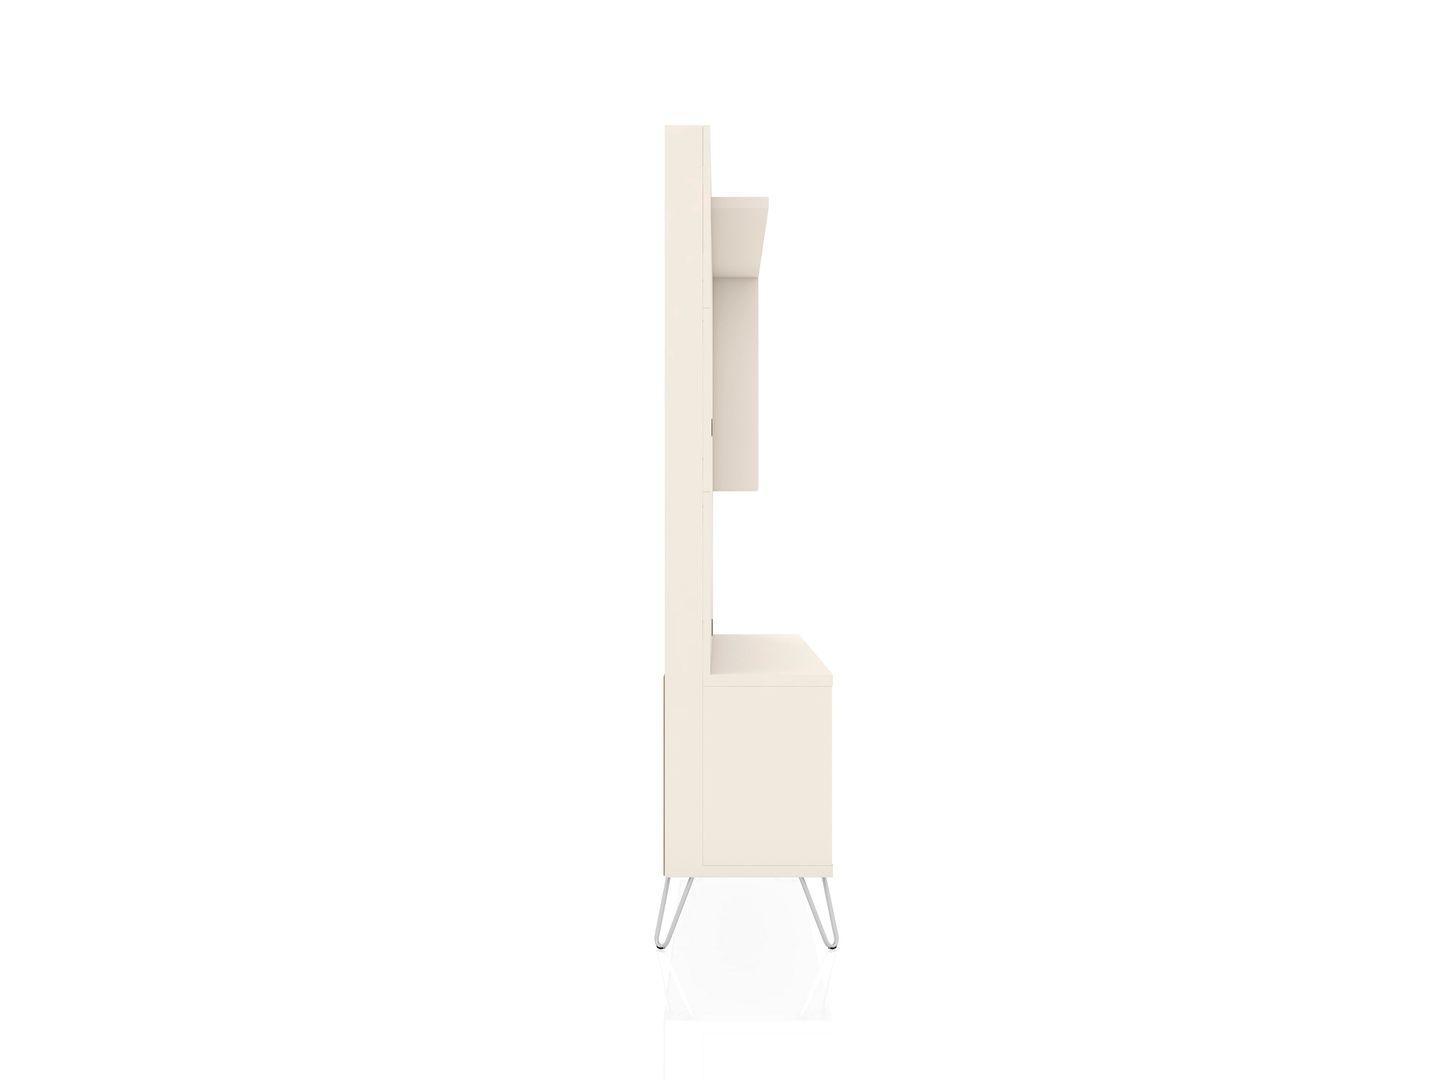 Manhattan Comfort Baxter 62.99 Freestanding Mid-Century Modern Entertainment Center with LED Lights and Décor Shelves in Off White